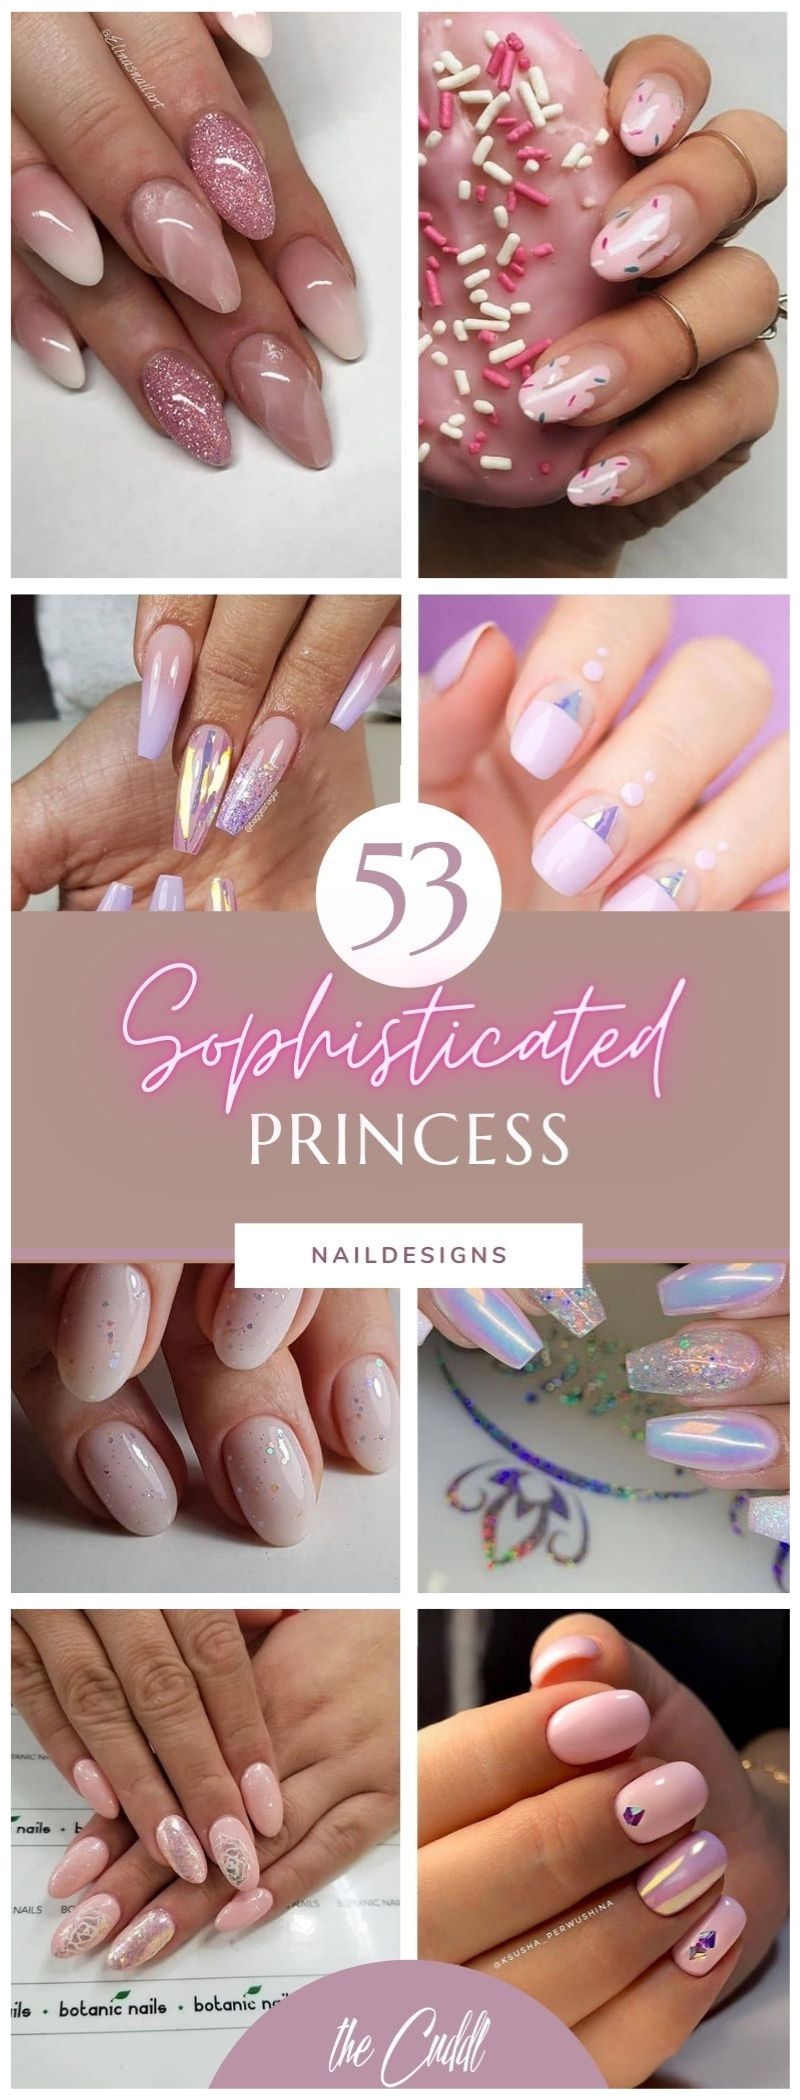 50 Glamorous Princess Nail Ideas and Designs To Try This Summer